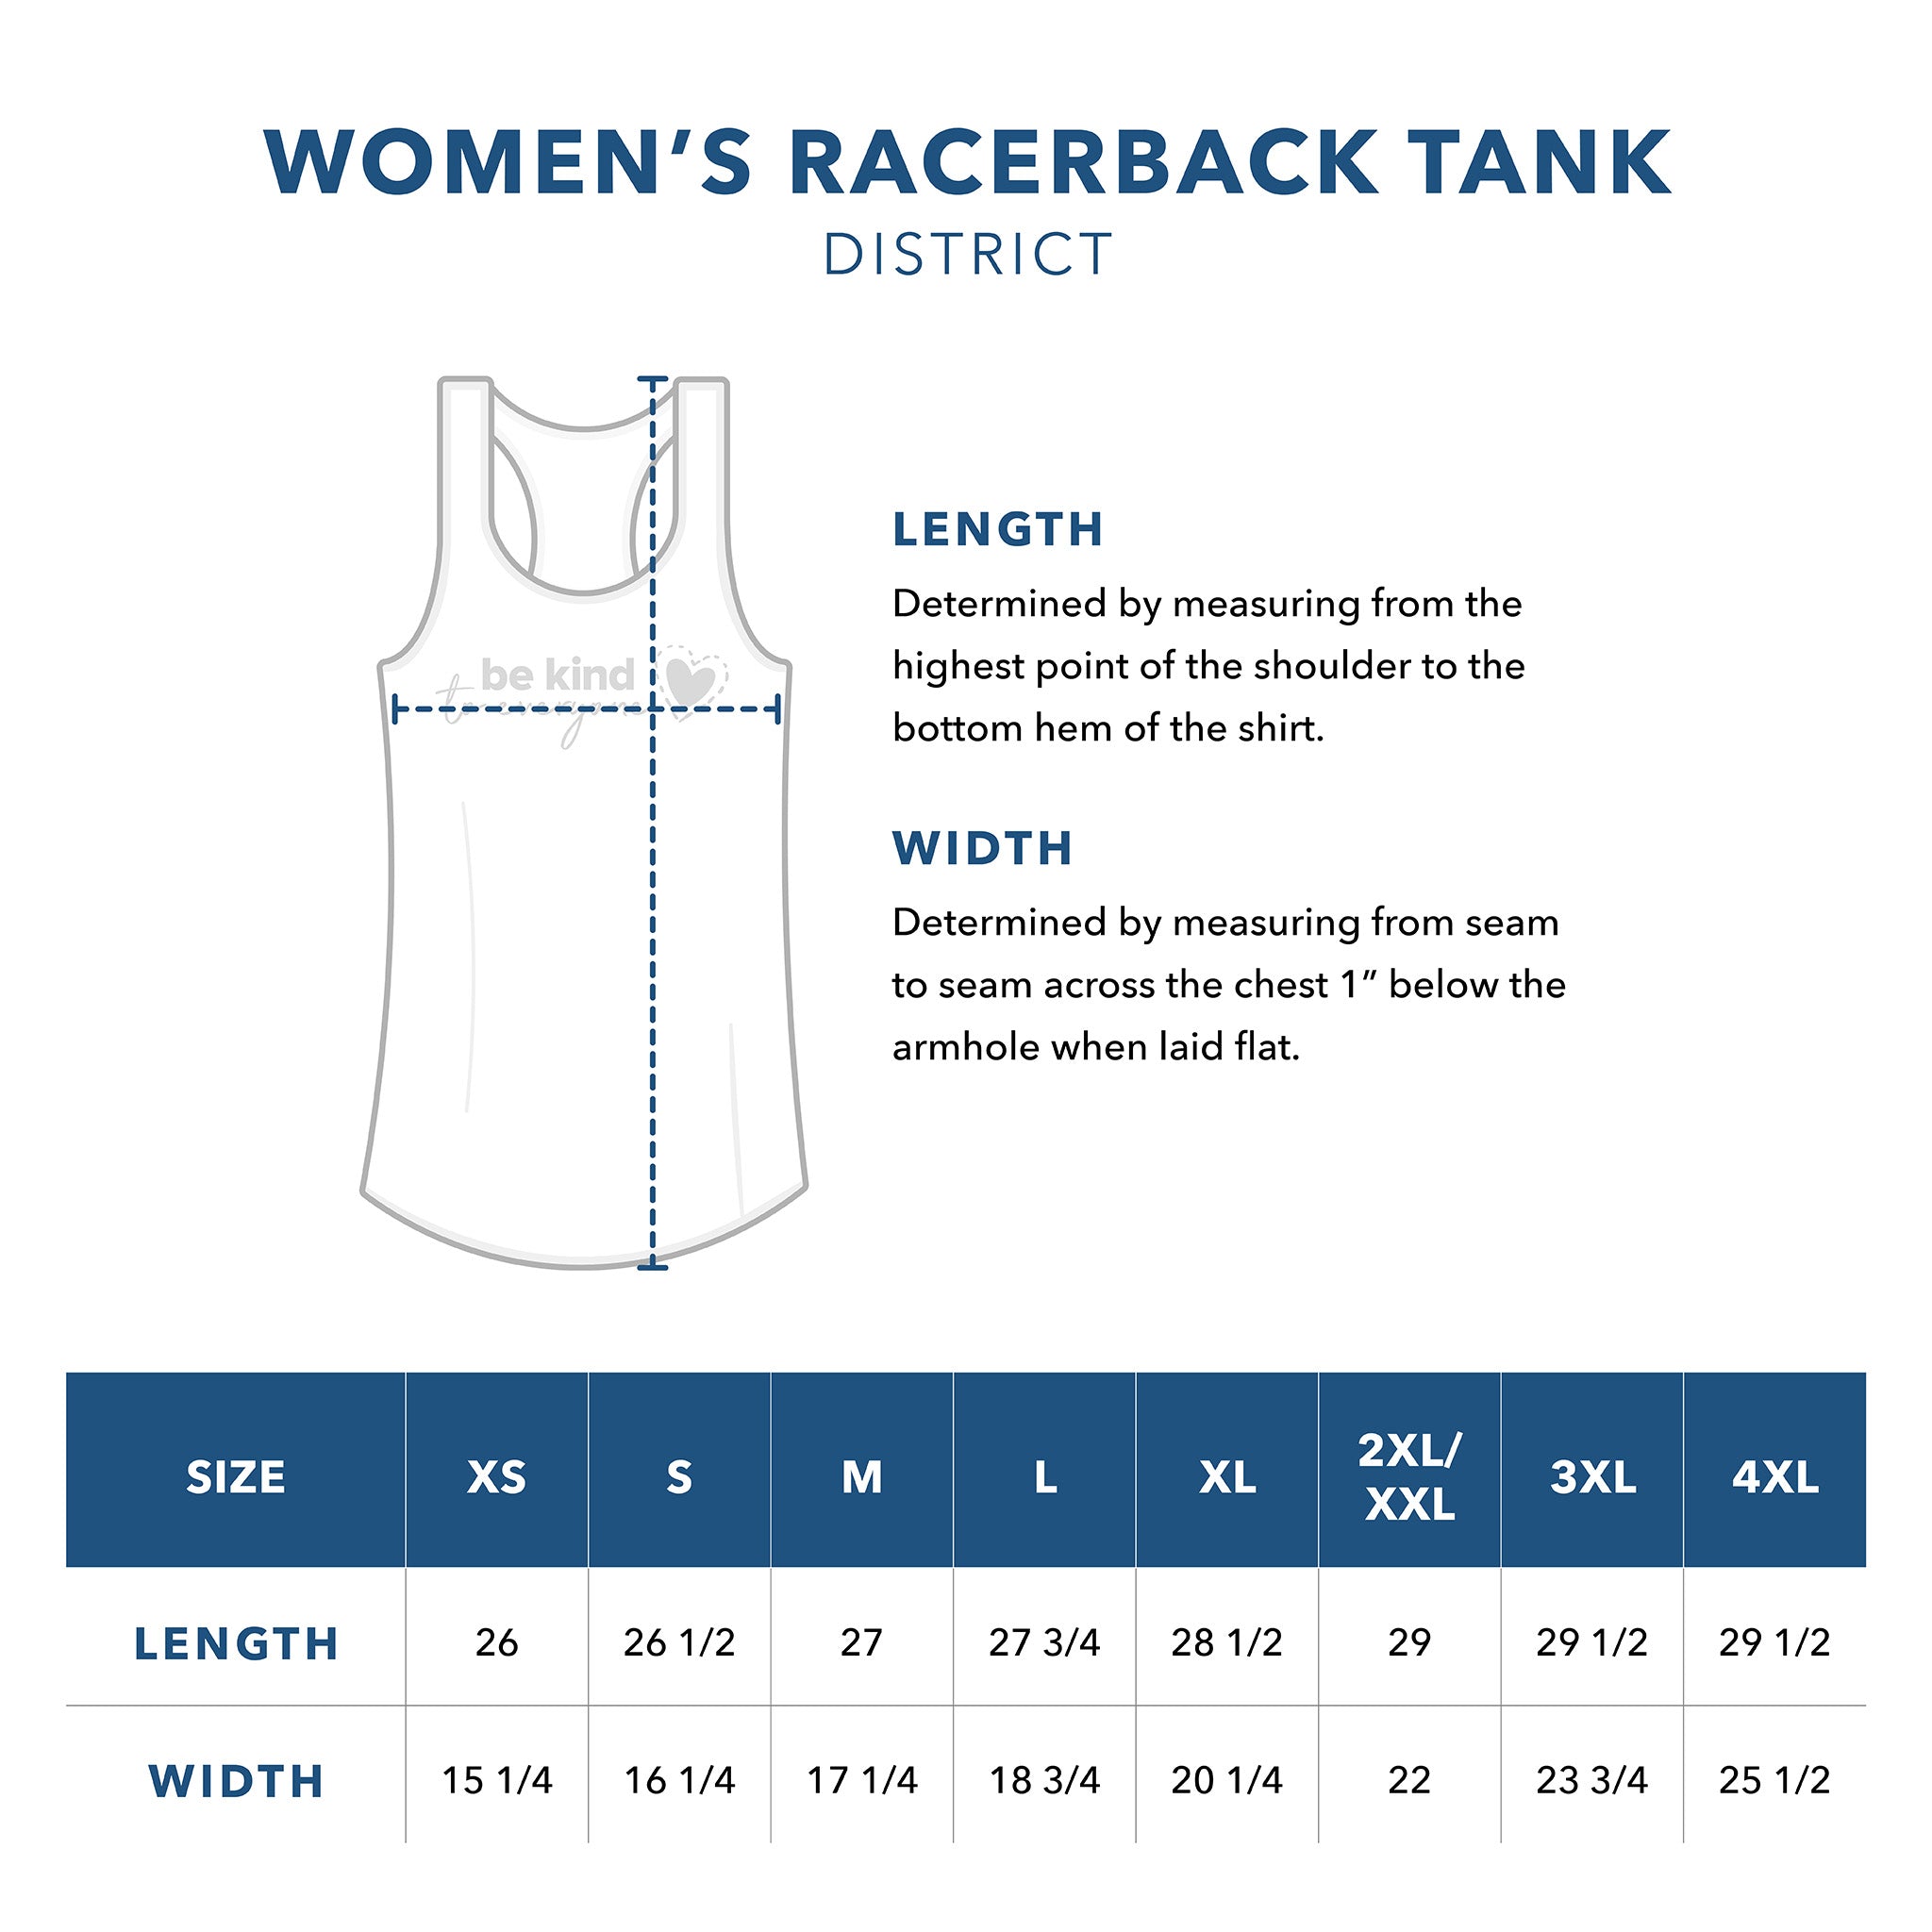 District Women's Racerback Tank Top Sizing Guide